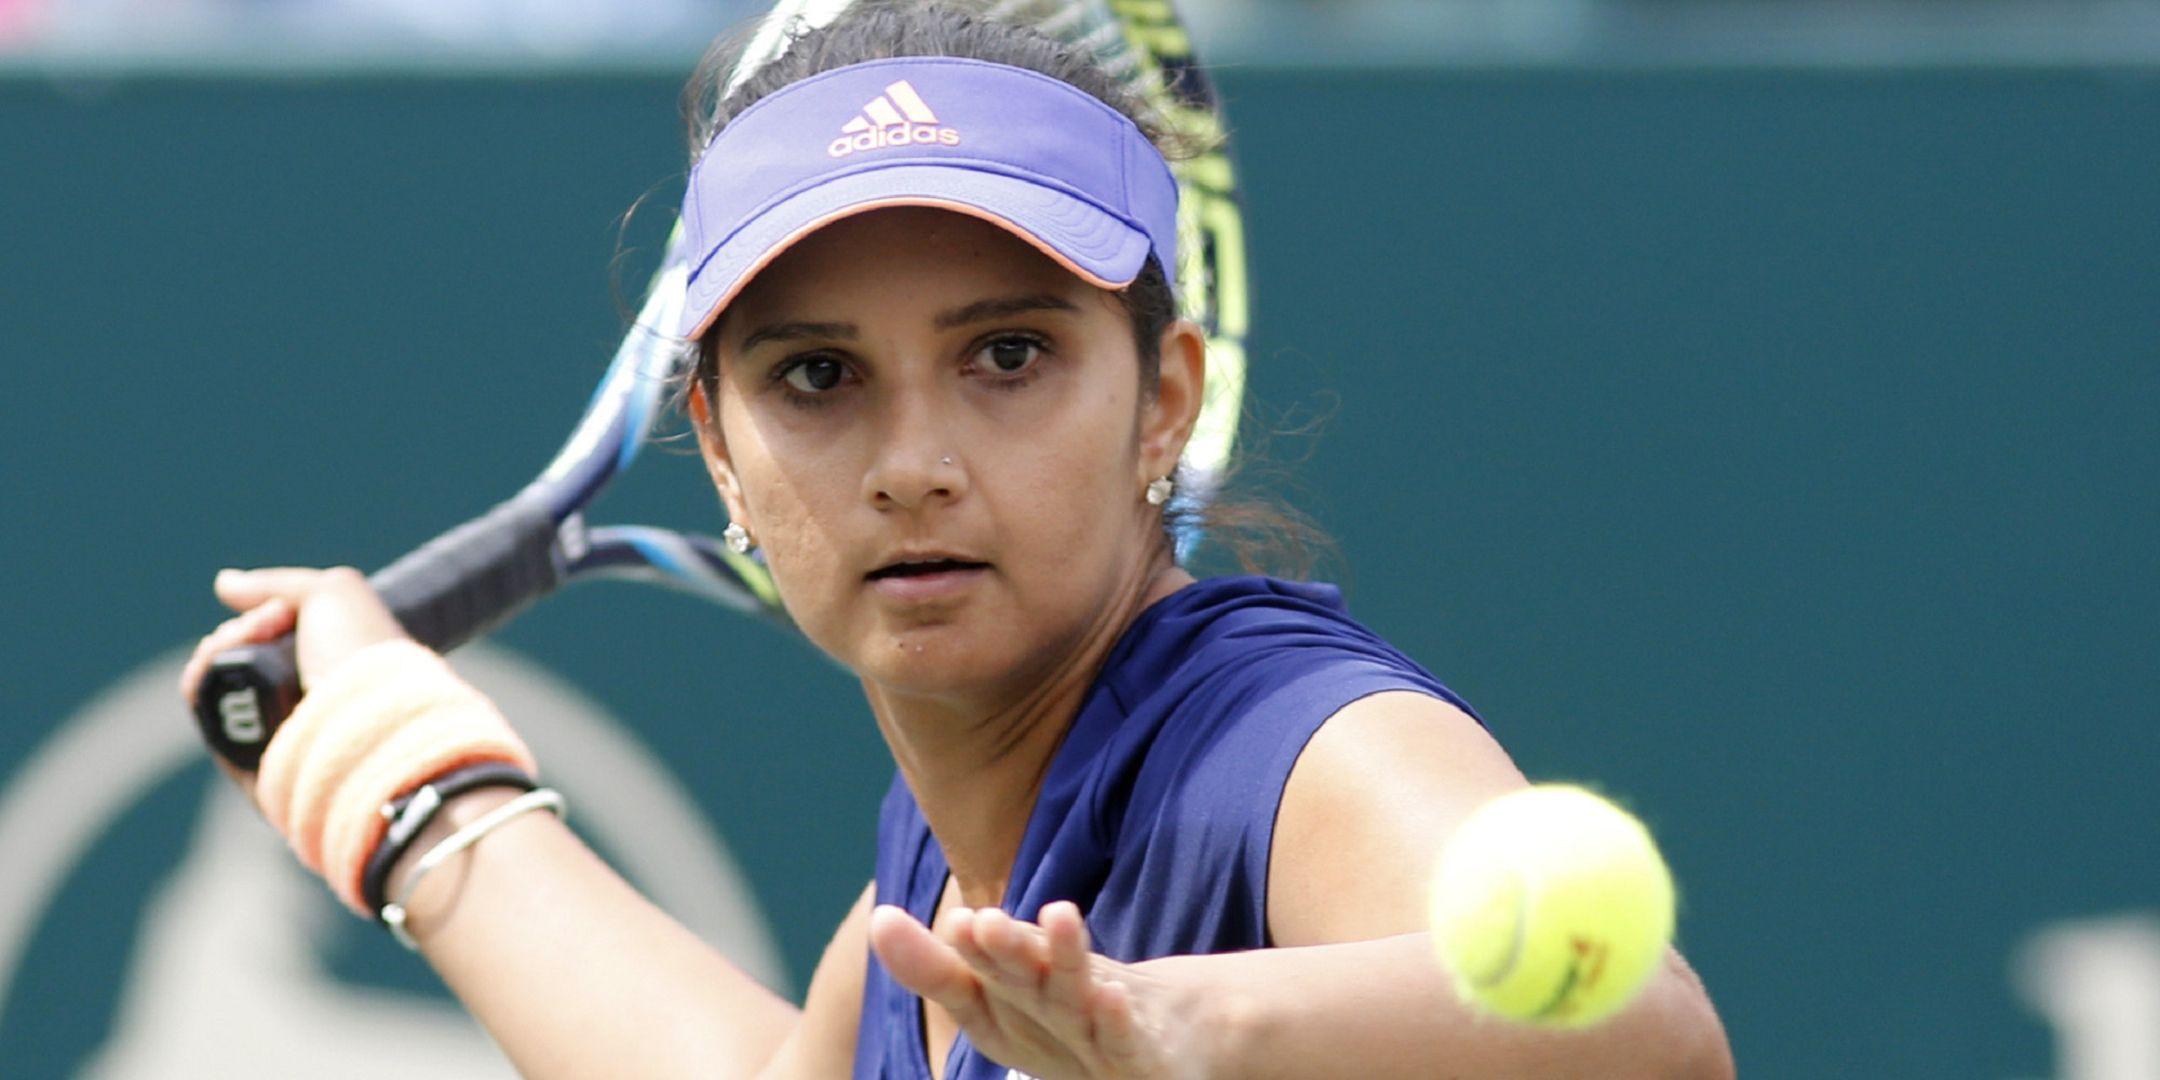 Sania Mirza Wallpaper Image Photo Picture Background